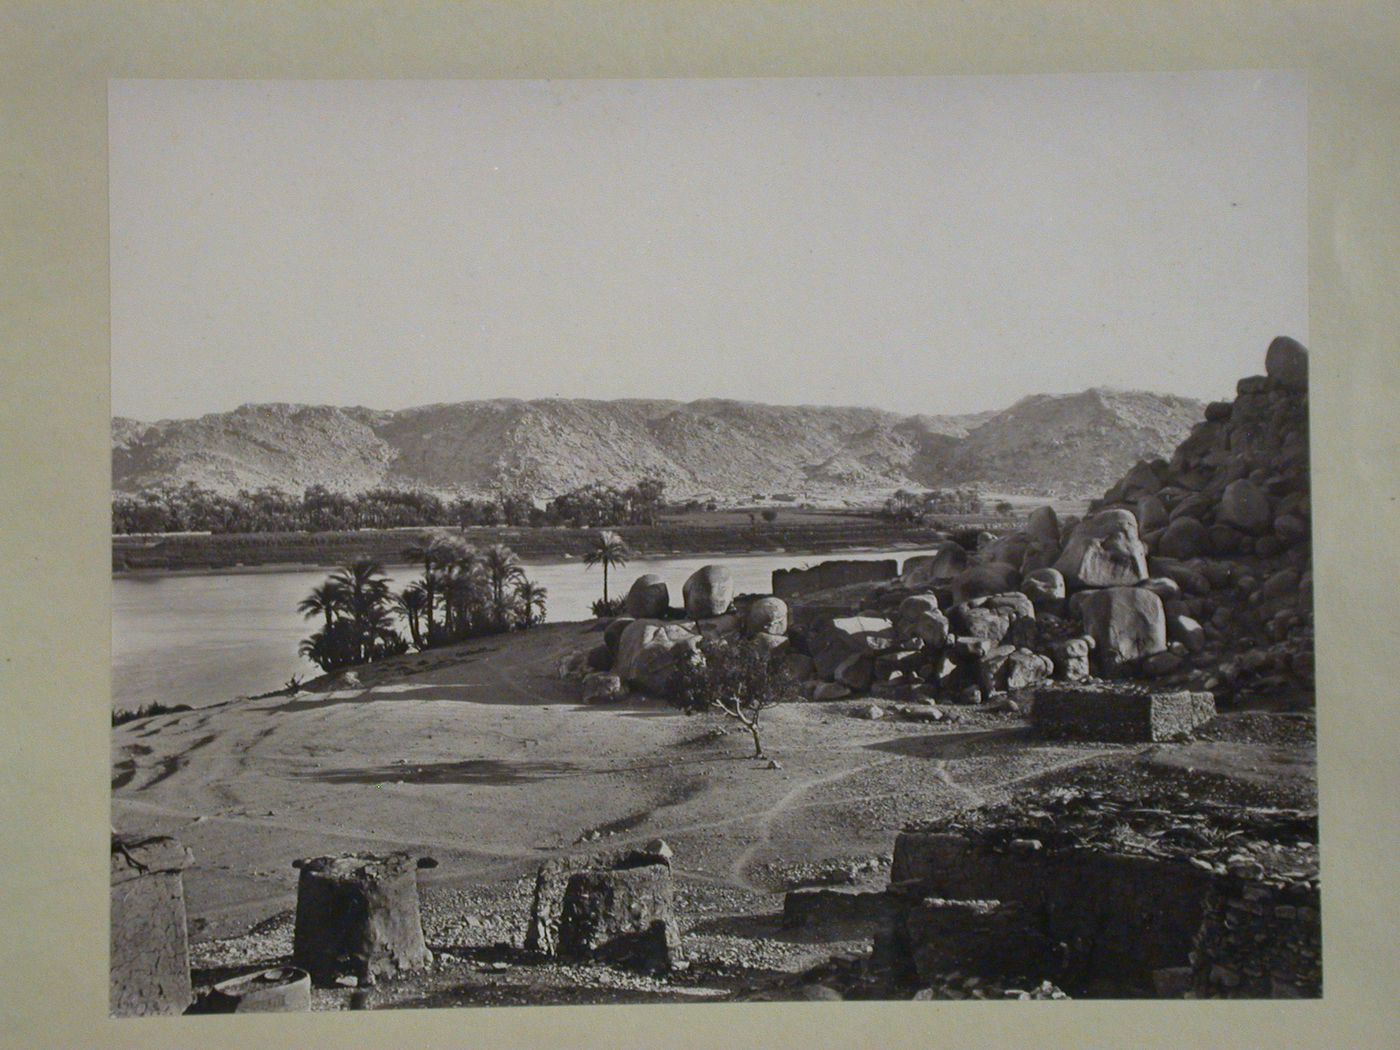 View of the Nile, looking East across river, with Nile sructures in foreground, Bigah Island [?], Egypt